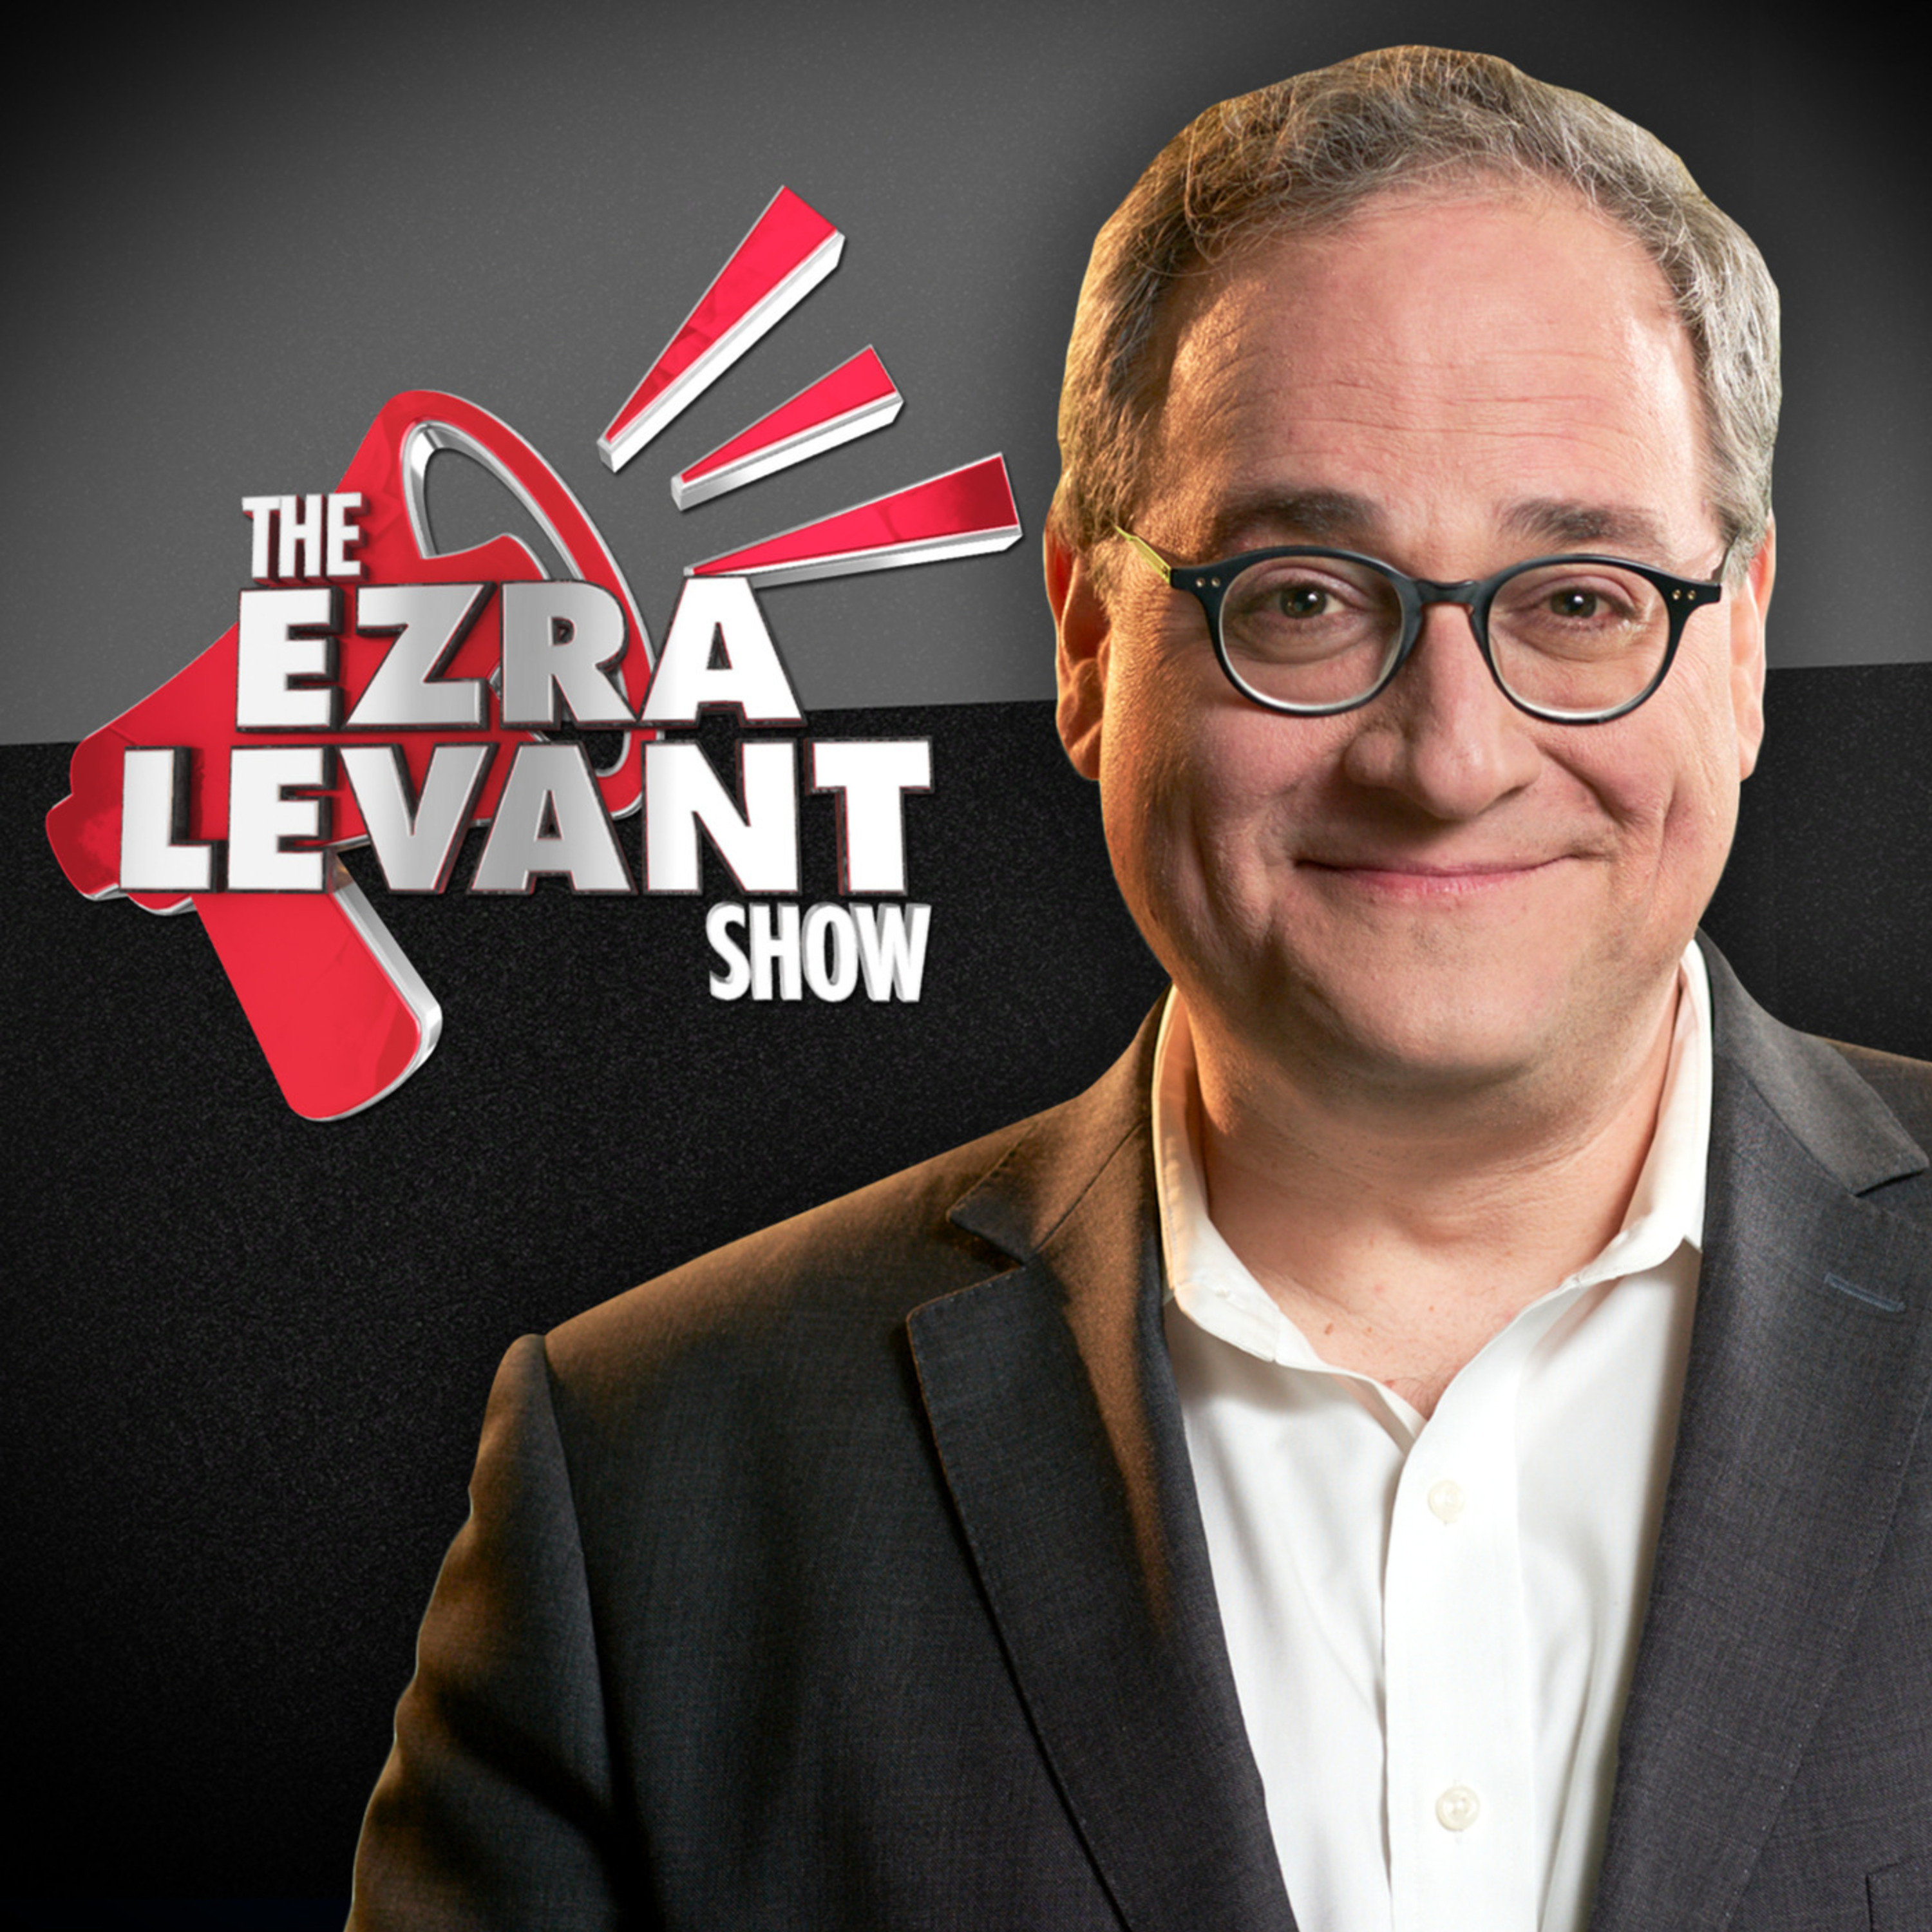 EZRA LEVANT | Canada's deepening discontent with Trudeau's out of touch Liberals